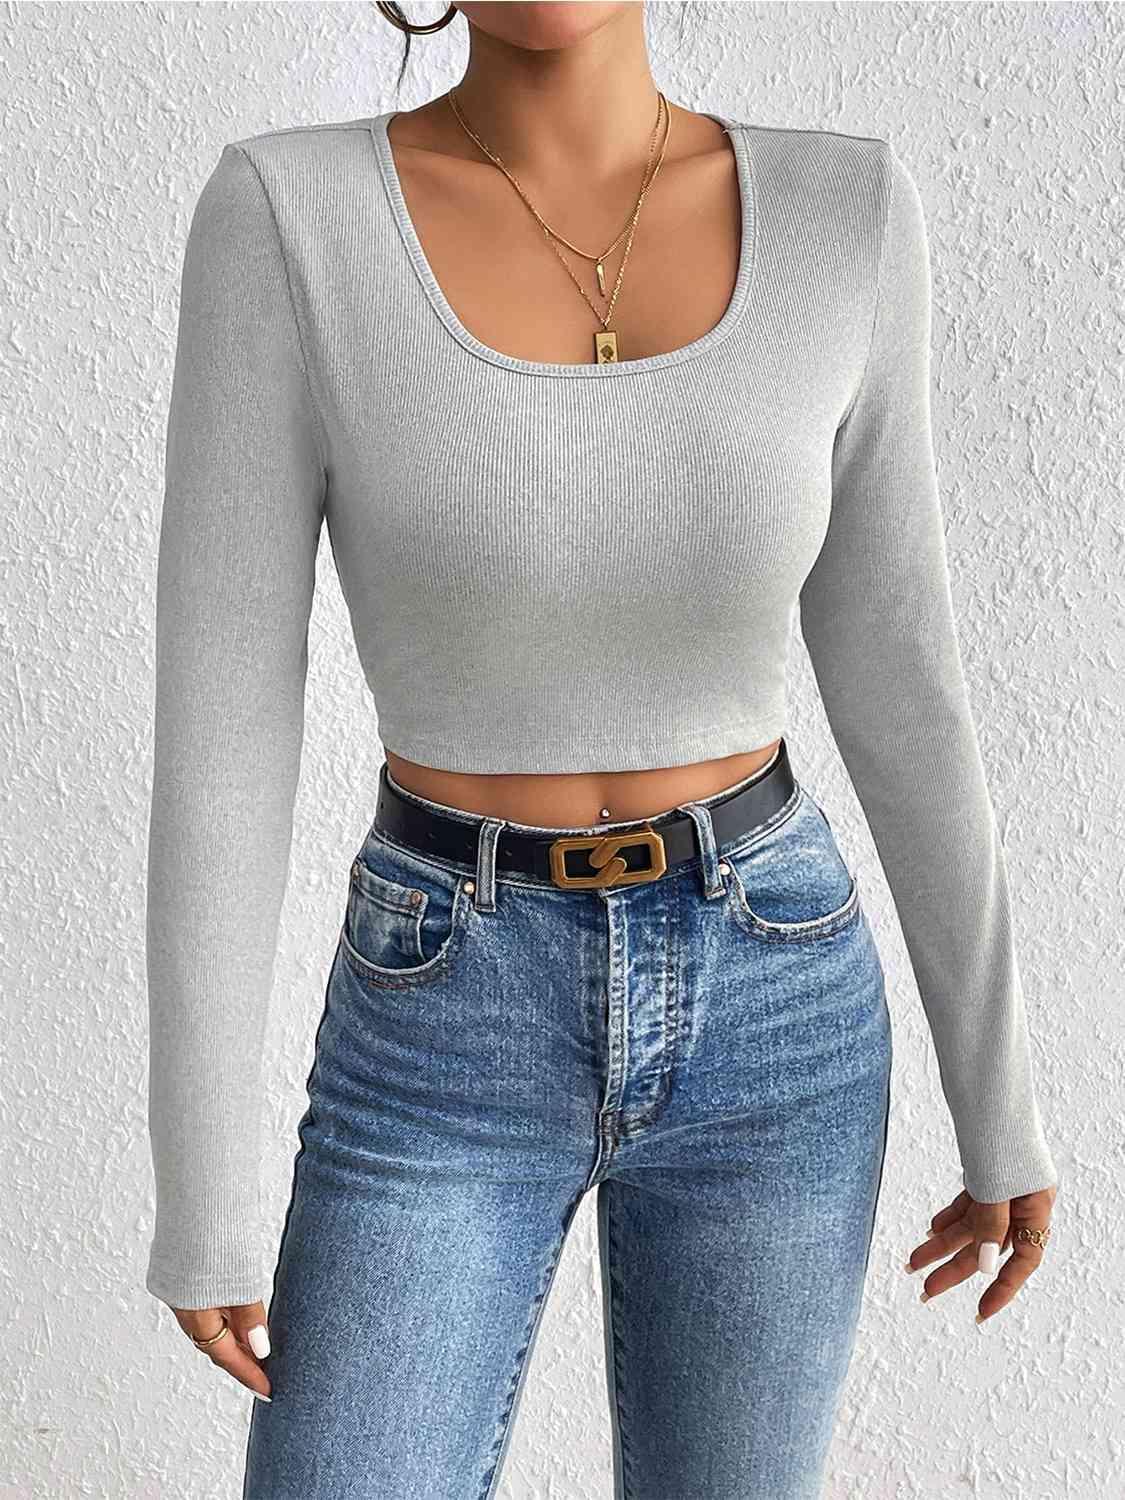 a woman wearing jeans and a crop top